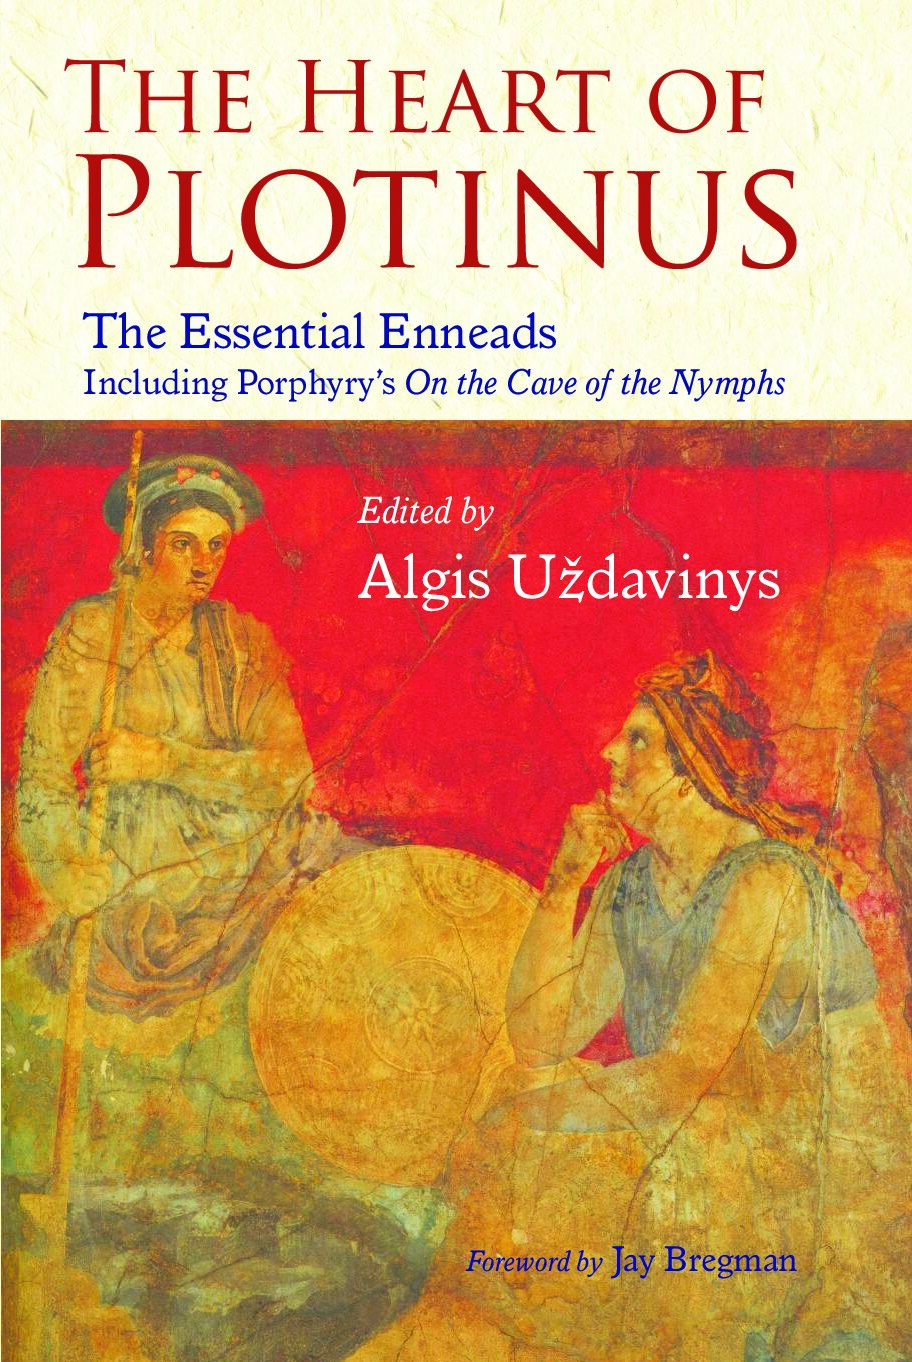 The Heart of Plotinus: The Essential Enneads